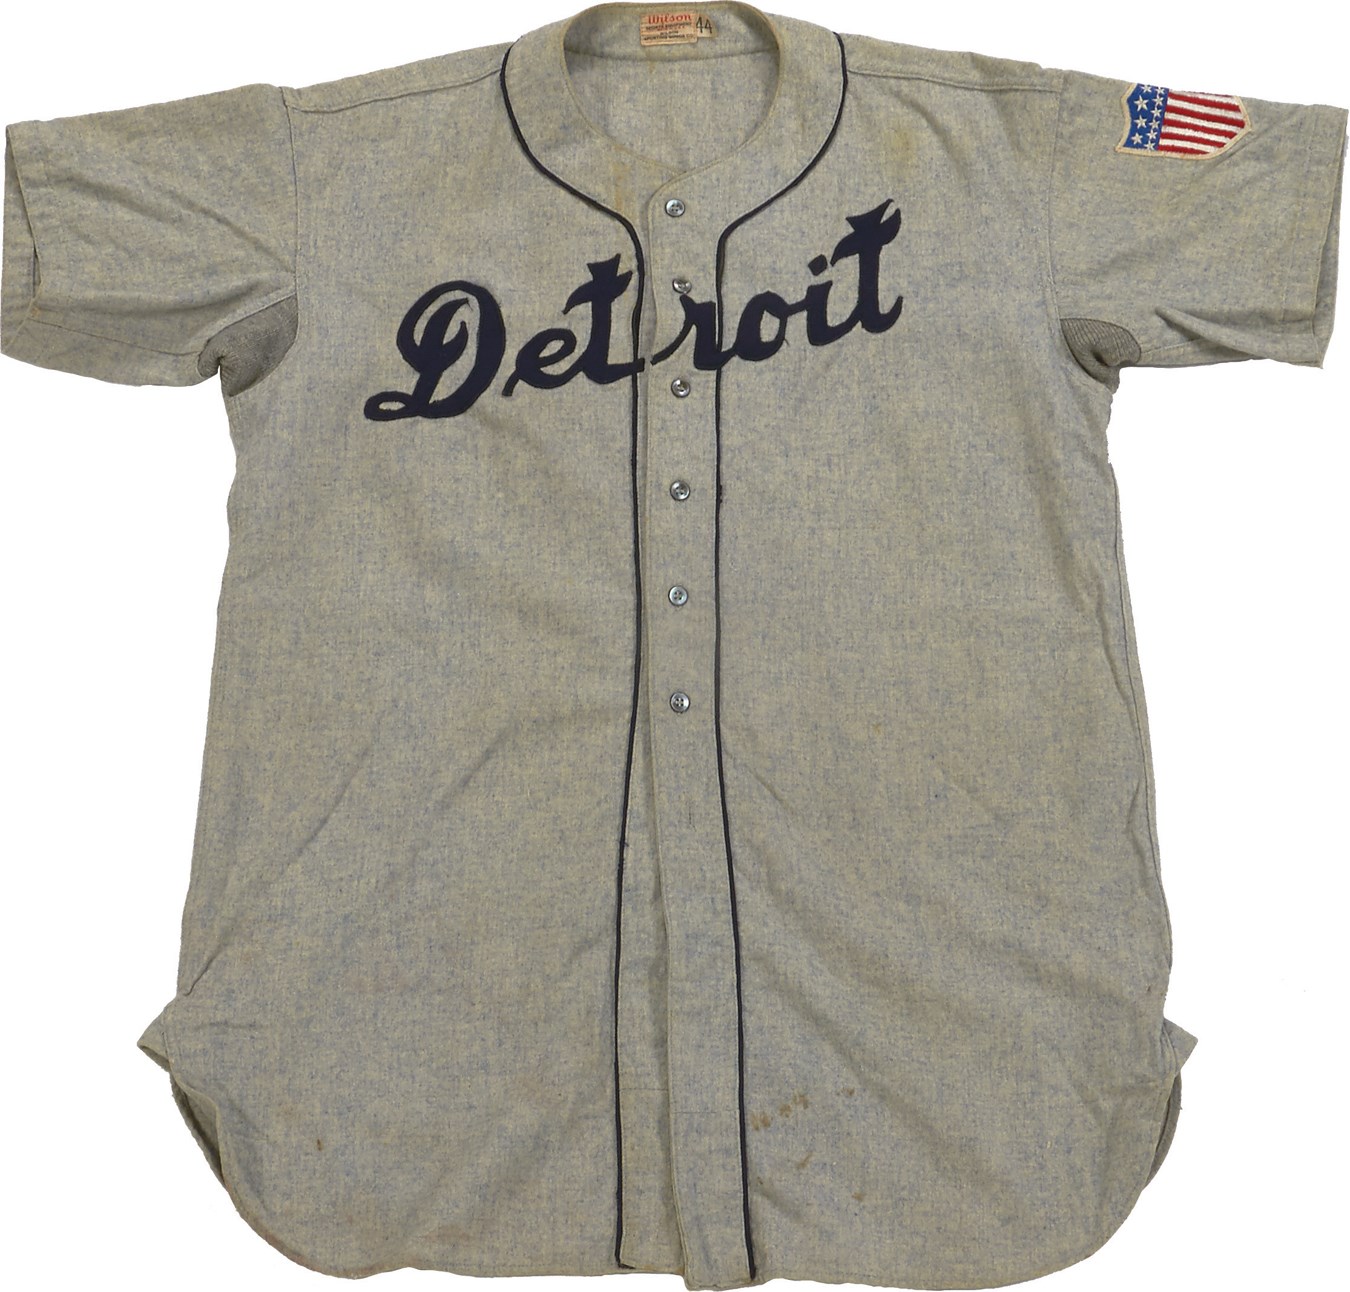 - 1945 World Champion Detroit Tigers Uniform with WWII Memorial Patch - Two No-Hitters!